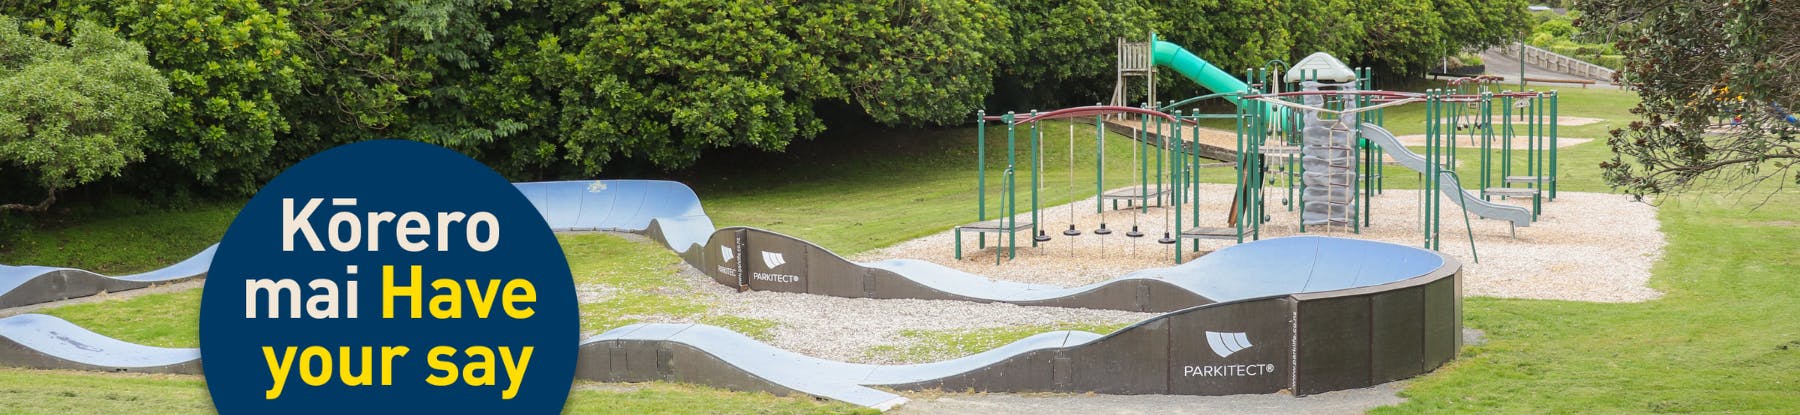 The ageing pump track and playground at Waikanae Park